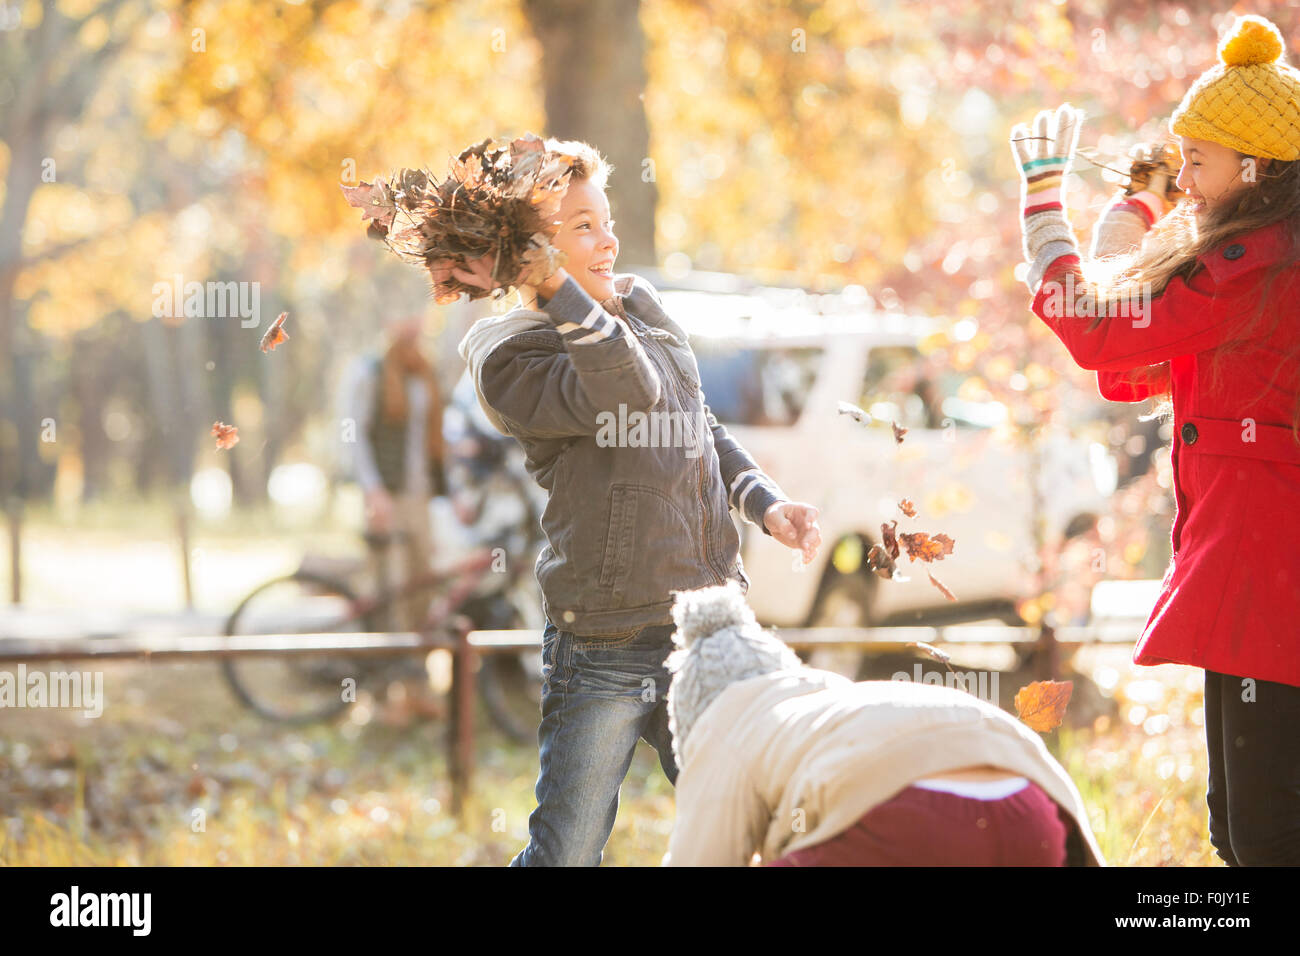 Boy throwing autumn leaves at girl in park Stock Photo